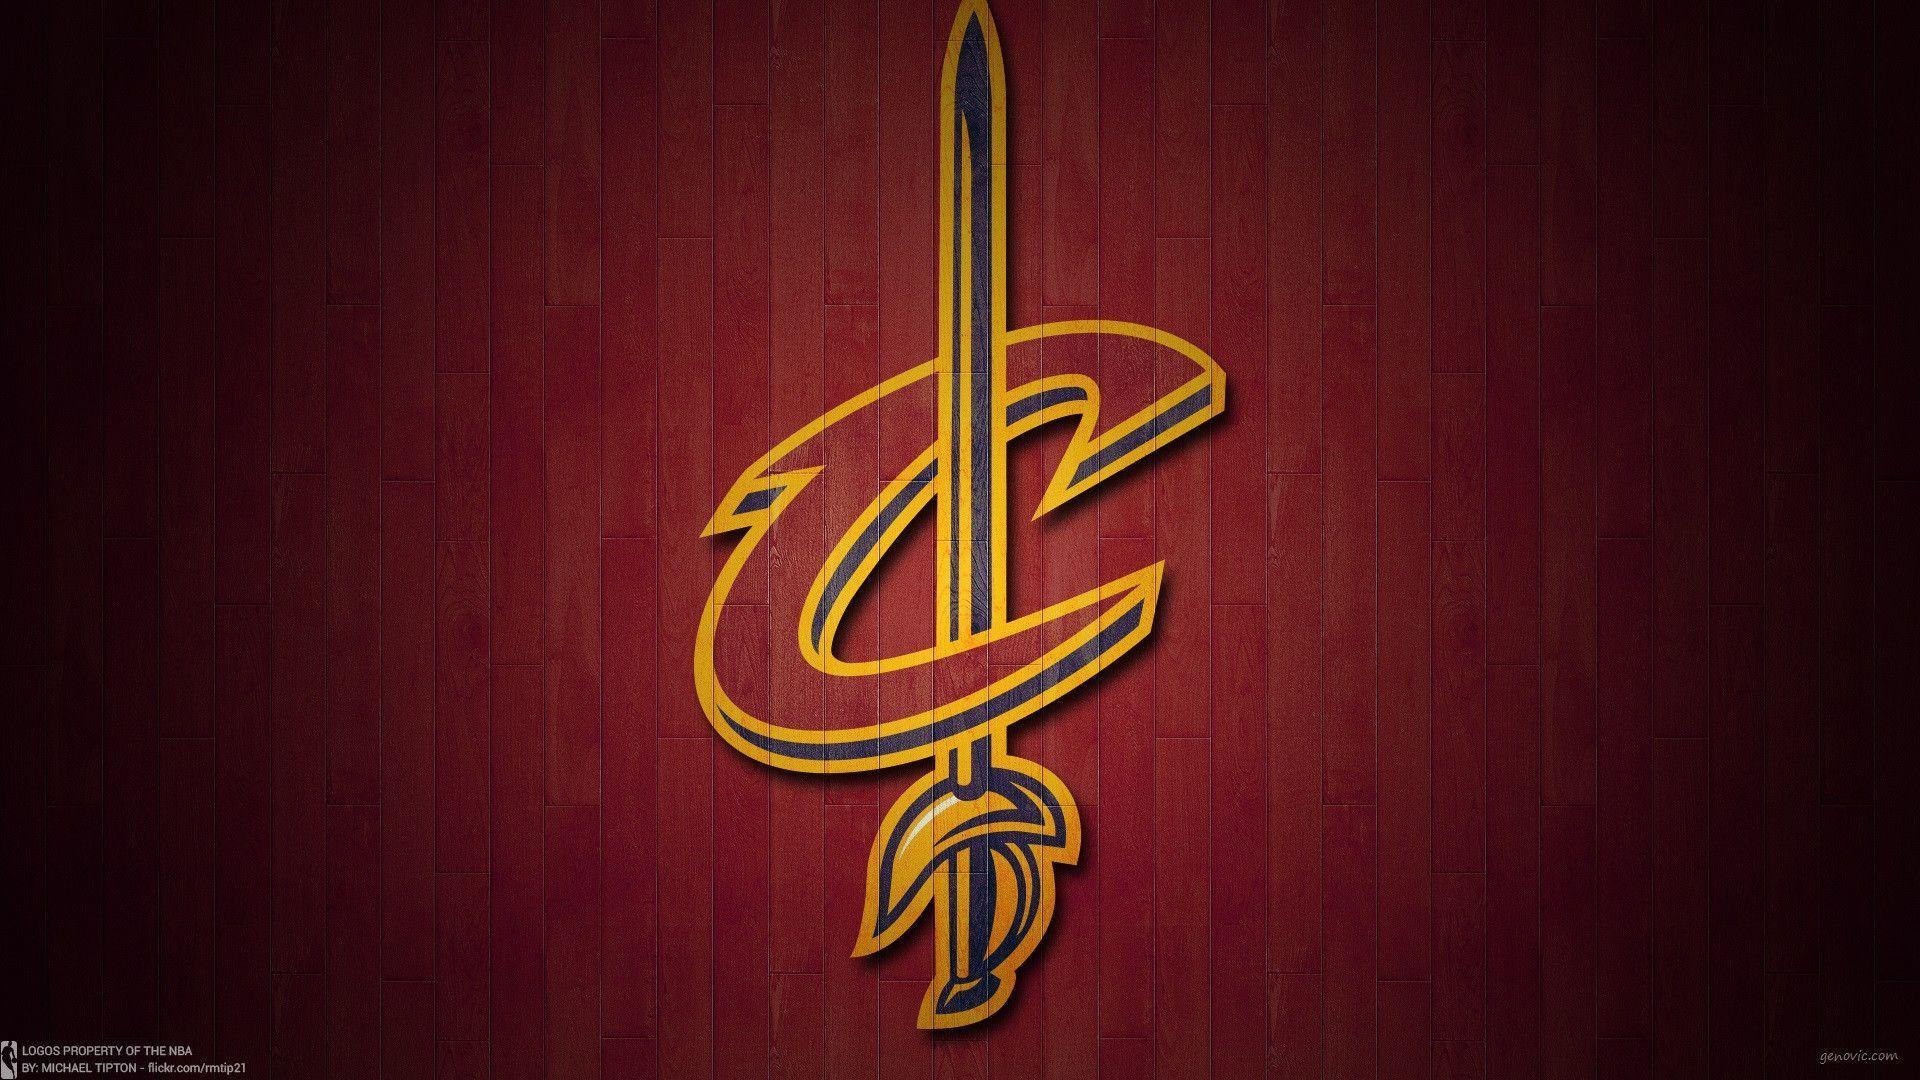 Cleveland Cavaliers Wallpaper Download Free